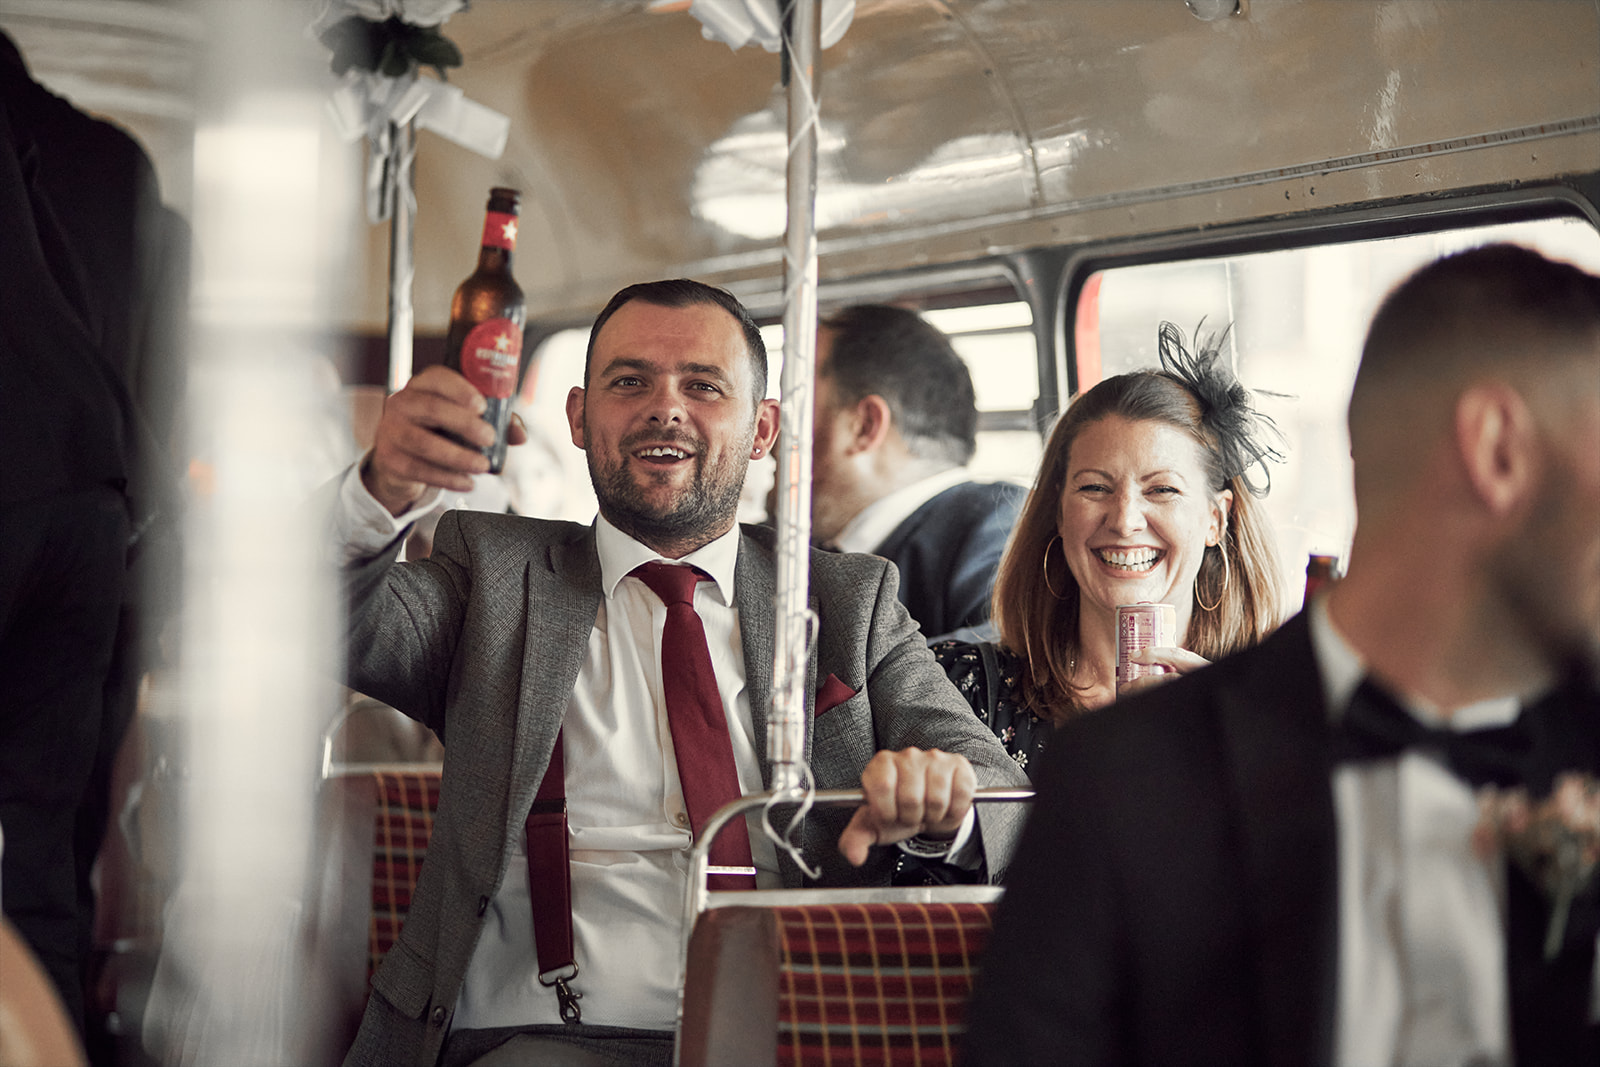 post-wedding celebration in the bus with guests